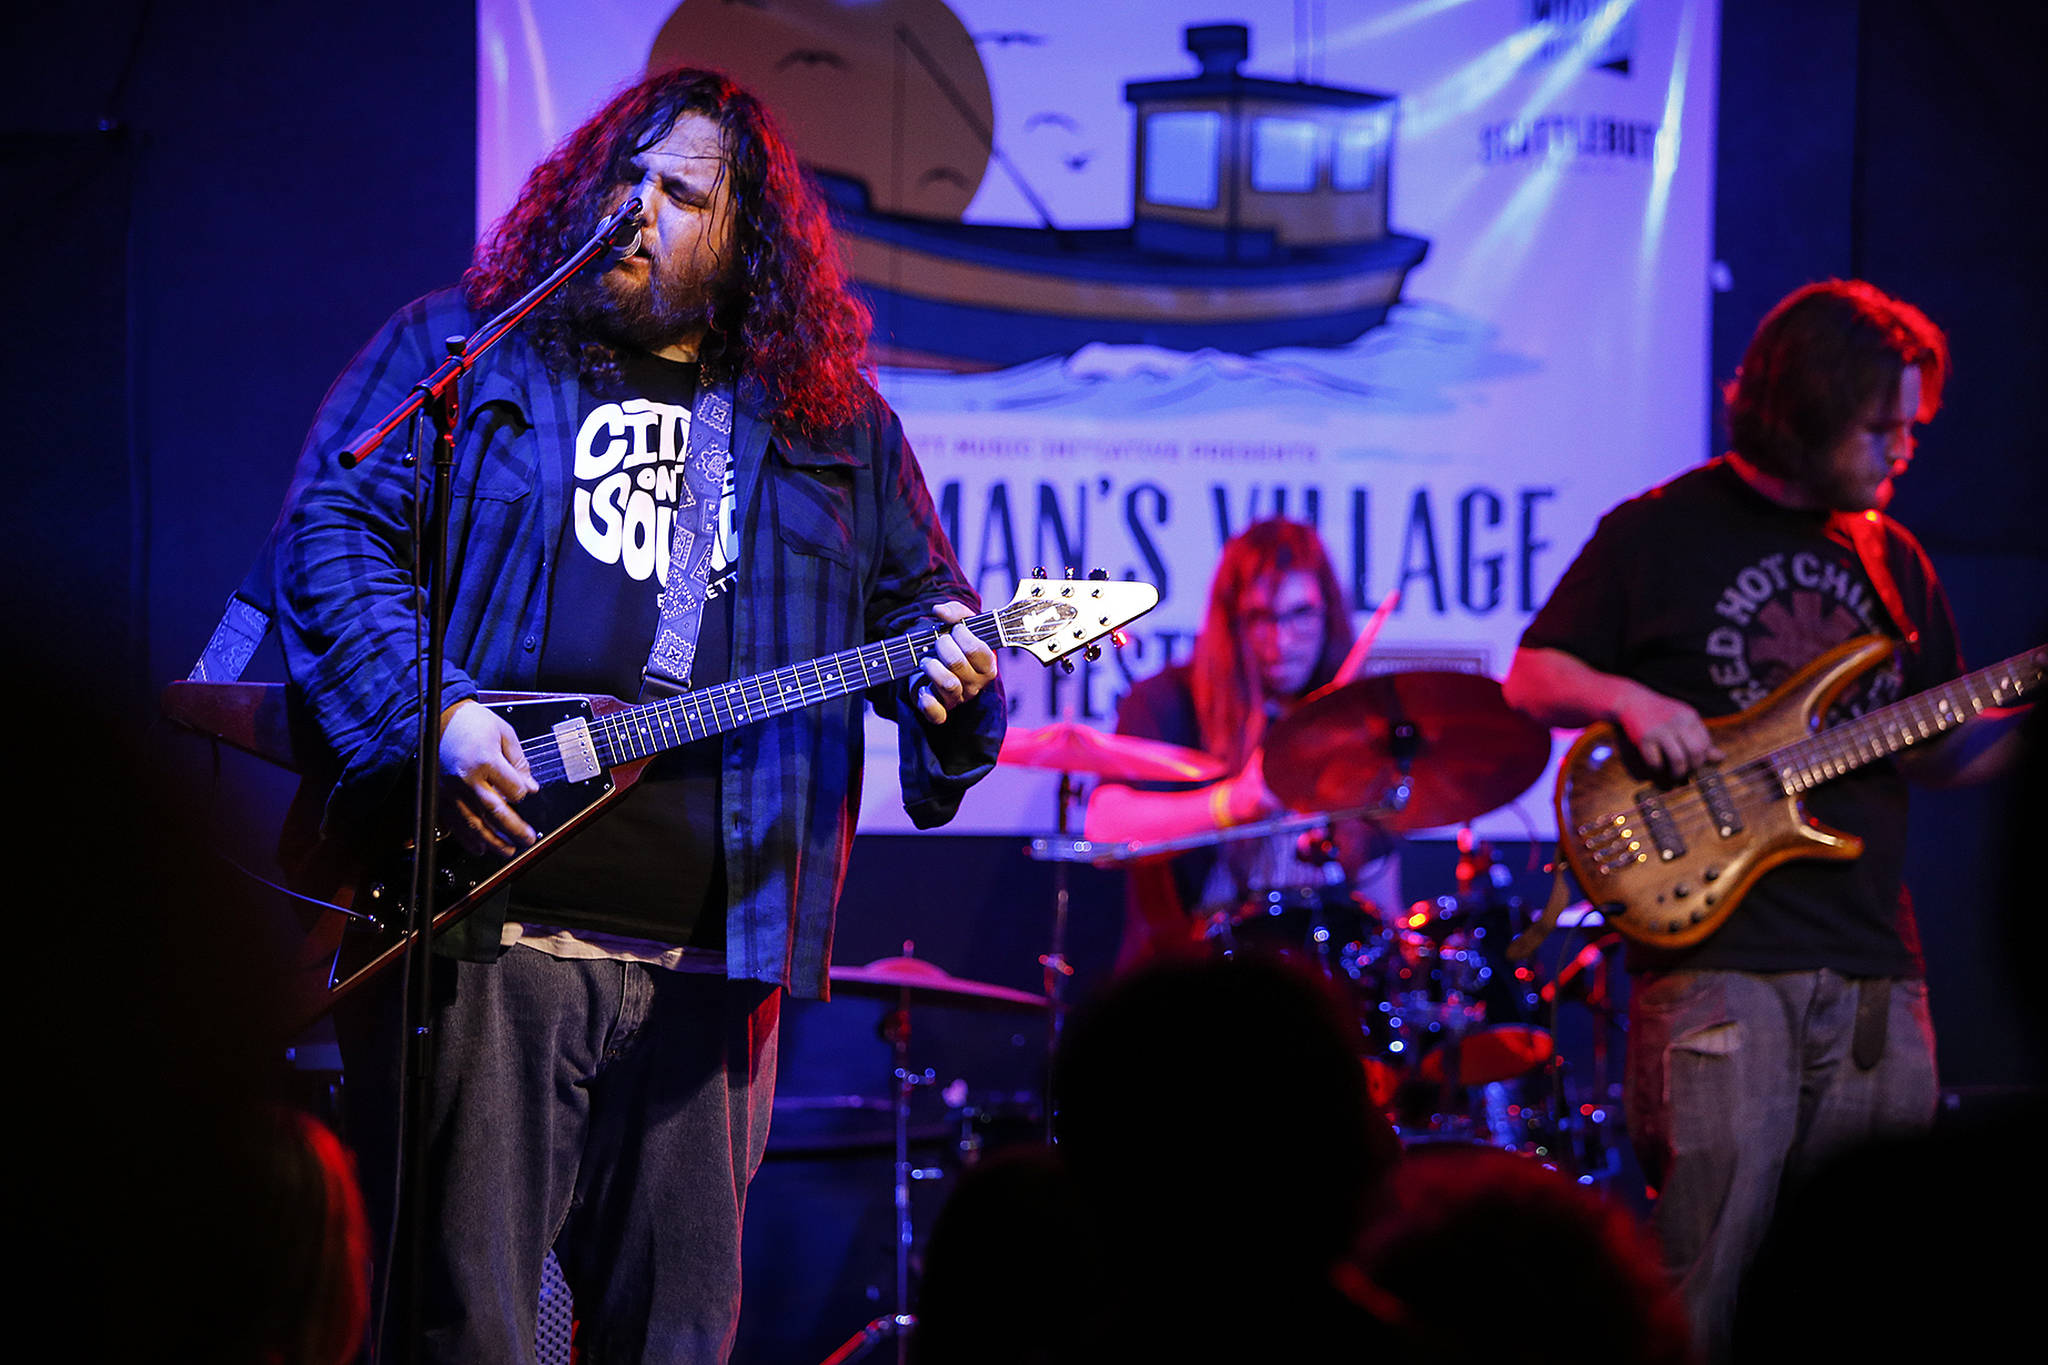 Kirk Rutherford (left) sings during a set of music from the Everett band The Moon Is Flat at Tony V’s during the opening night of the Fisherman’s Village Music Festival in Everett on Friday, March 31. (Ian Terry / The Herald)